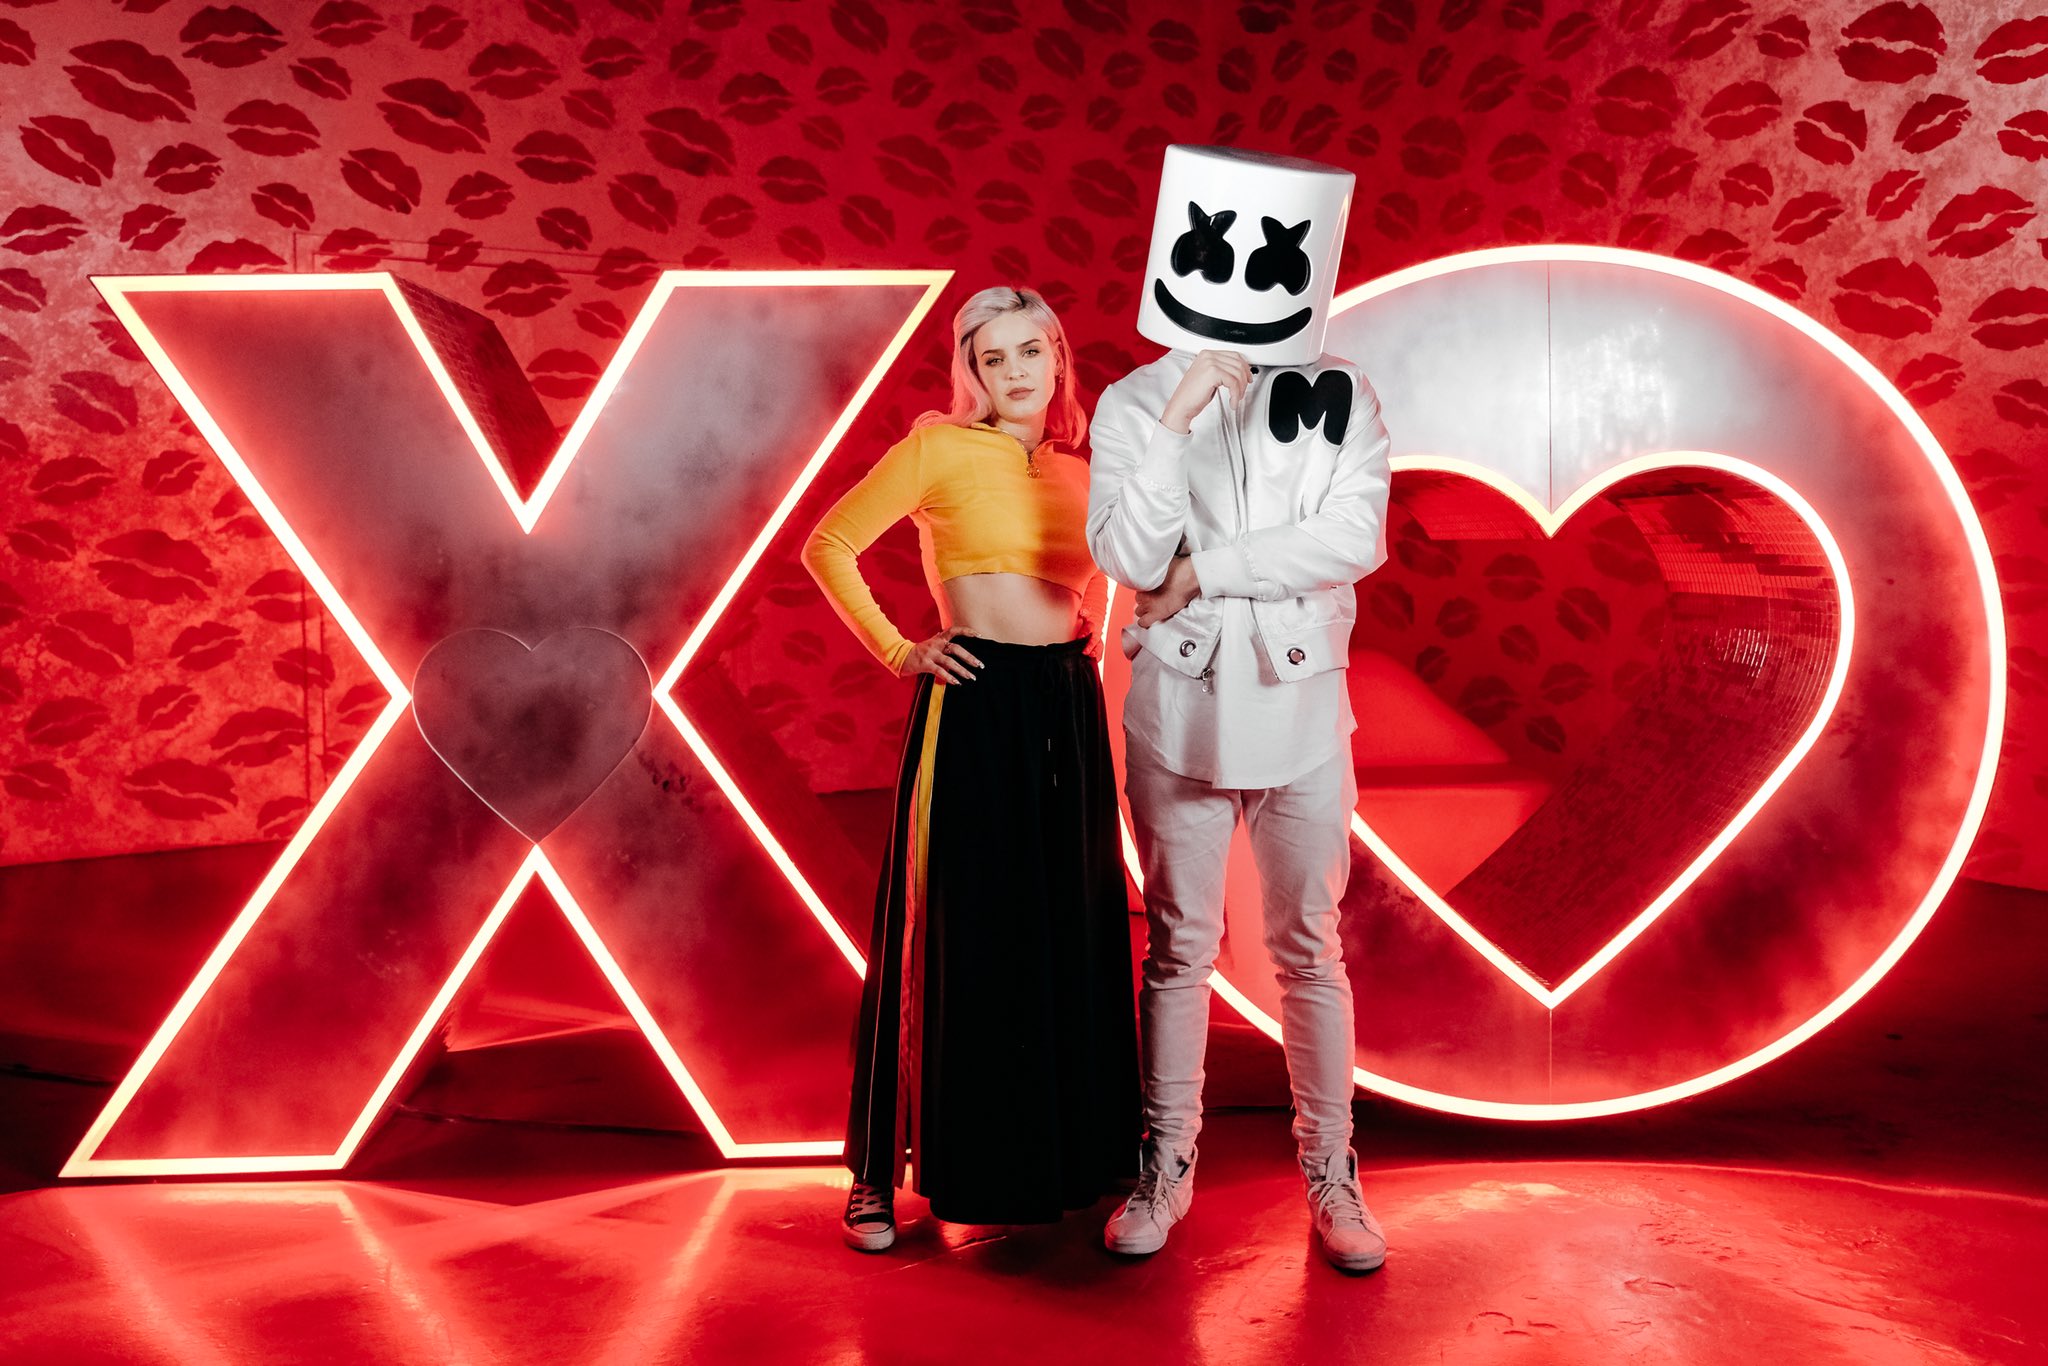 Most Added: Missy misses out as Marshmello gets a monster reception